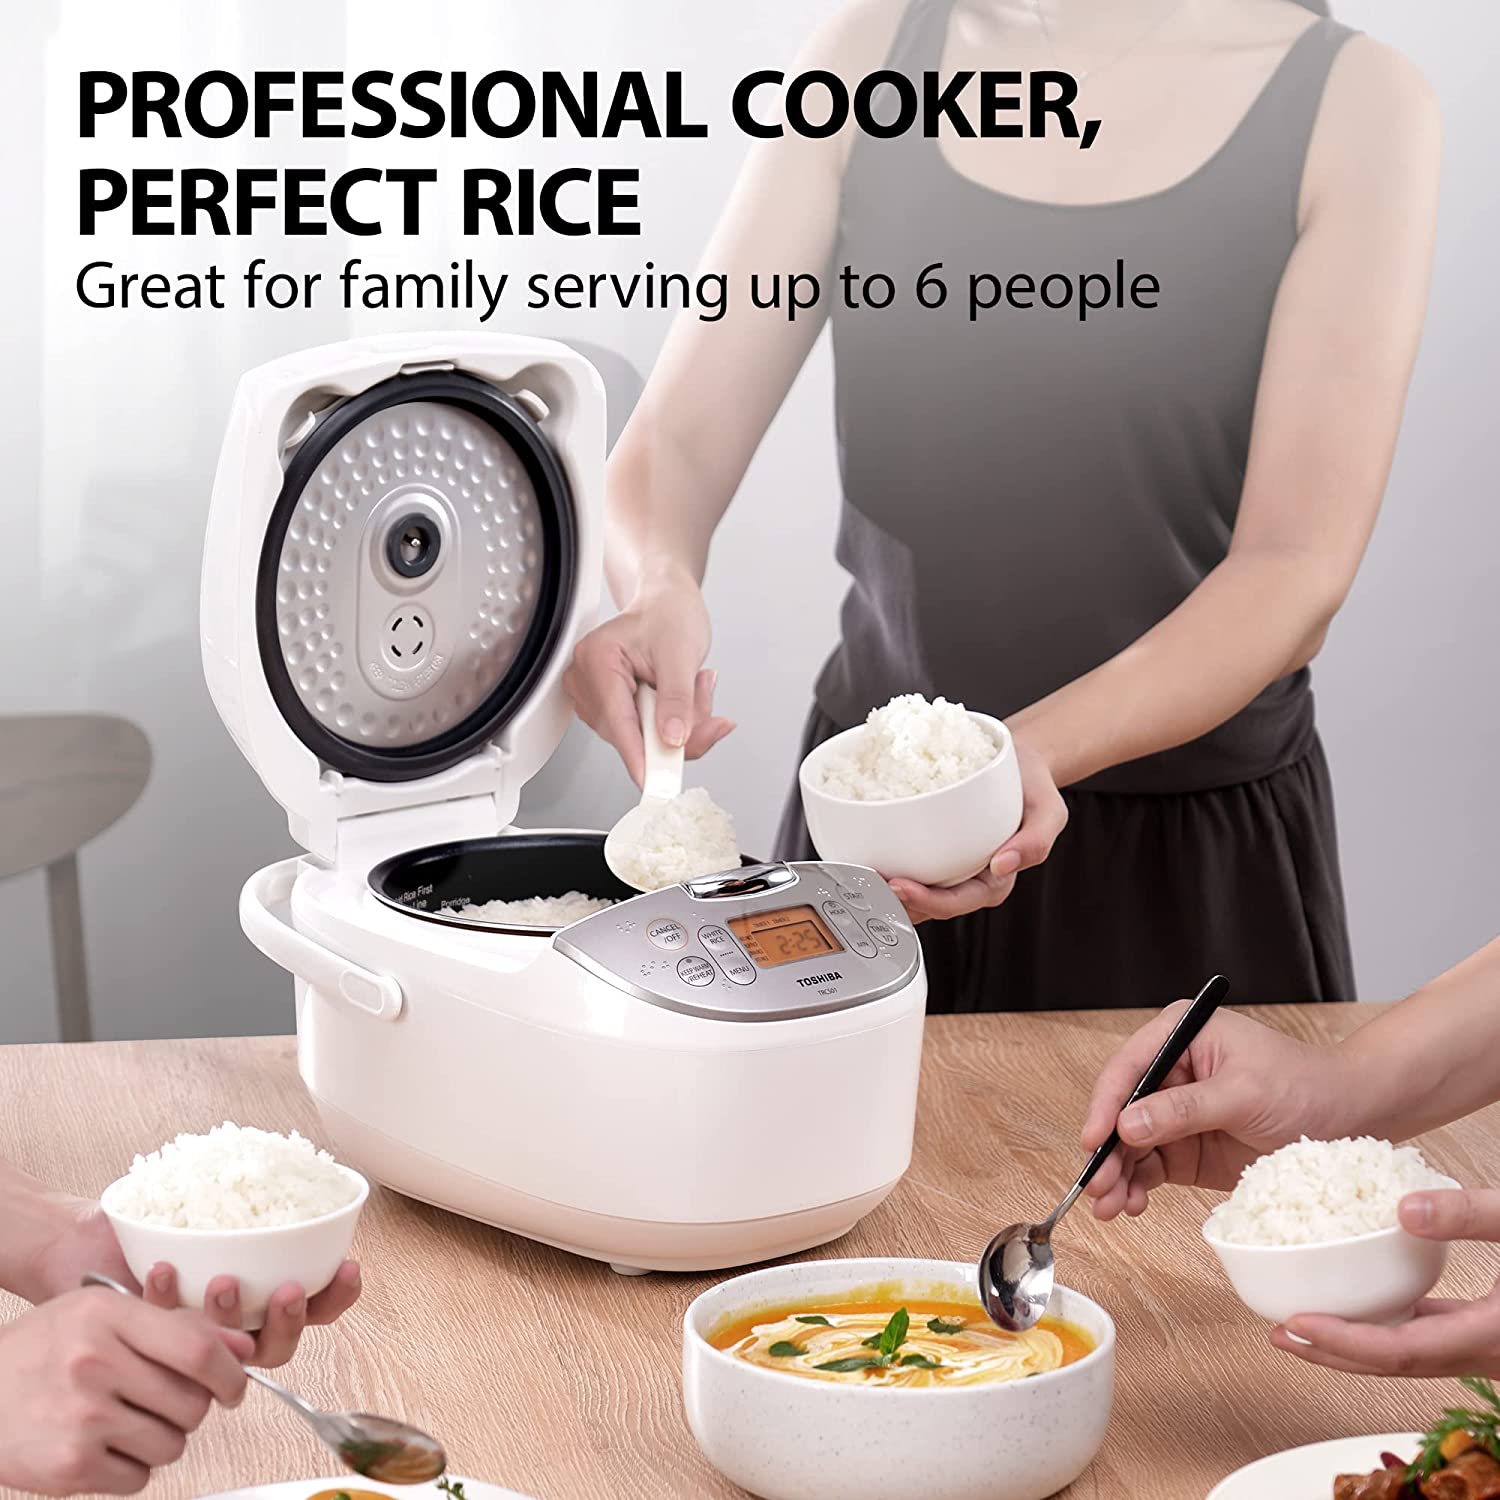 HOW TO CHOOSE THE RIGHT RICE COOKER?